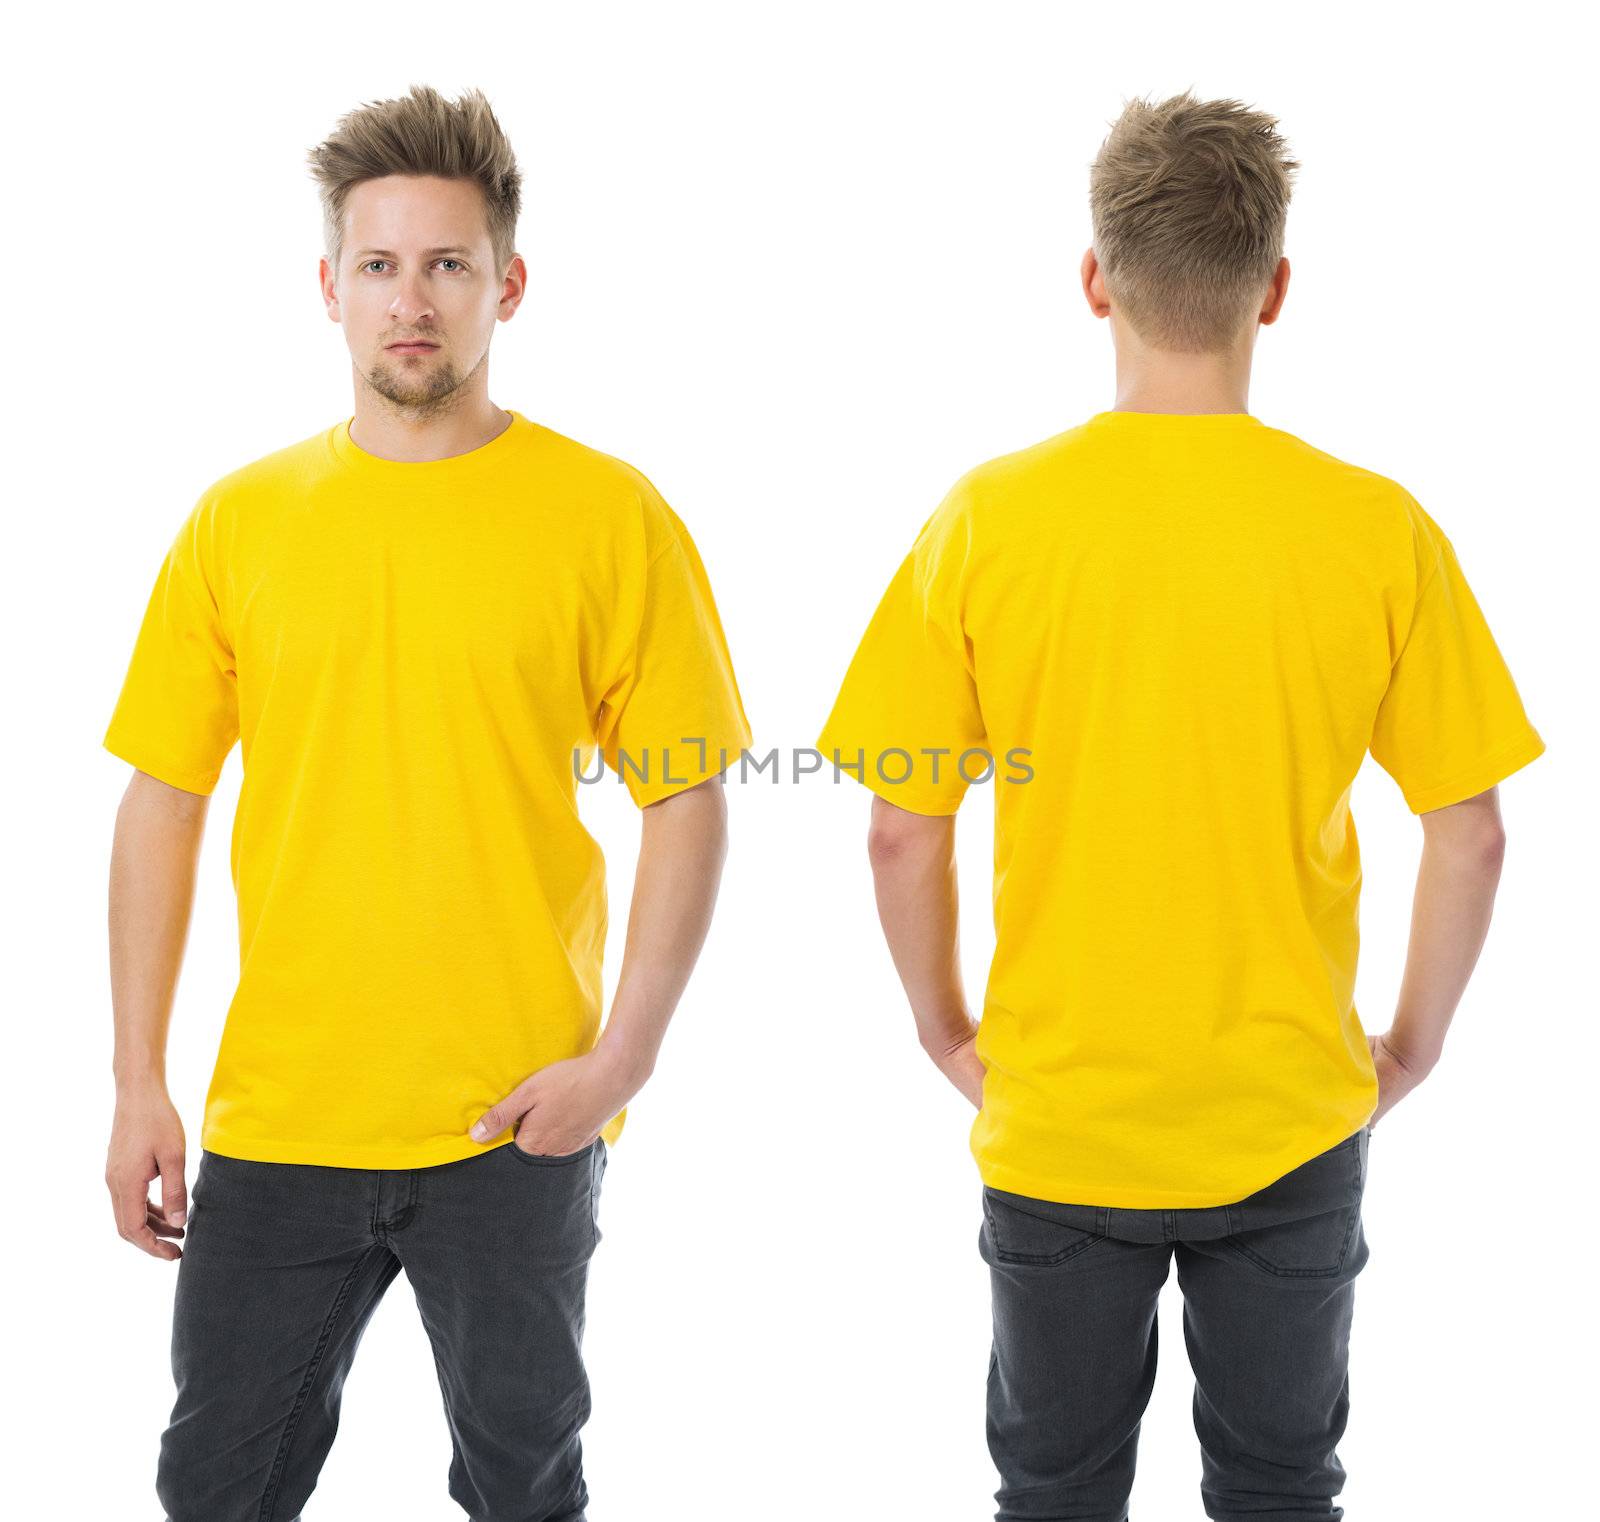 Photo of a man wearing blank yellow t-shirt, front and back. Ready for your design or artwork.